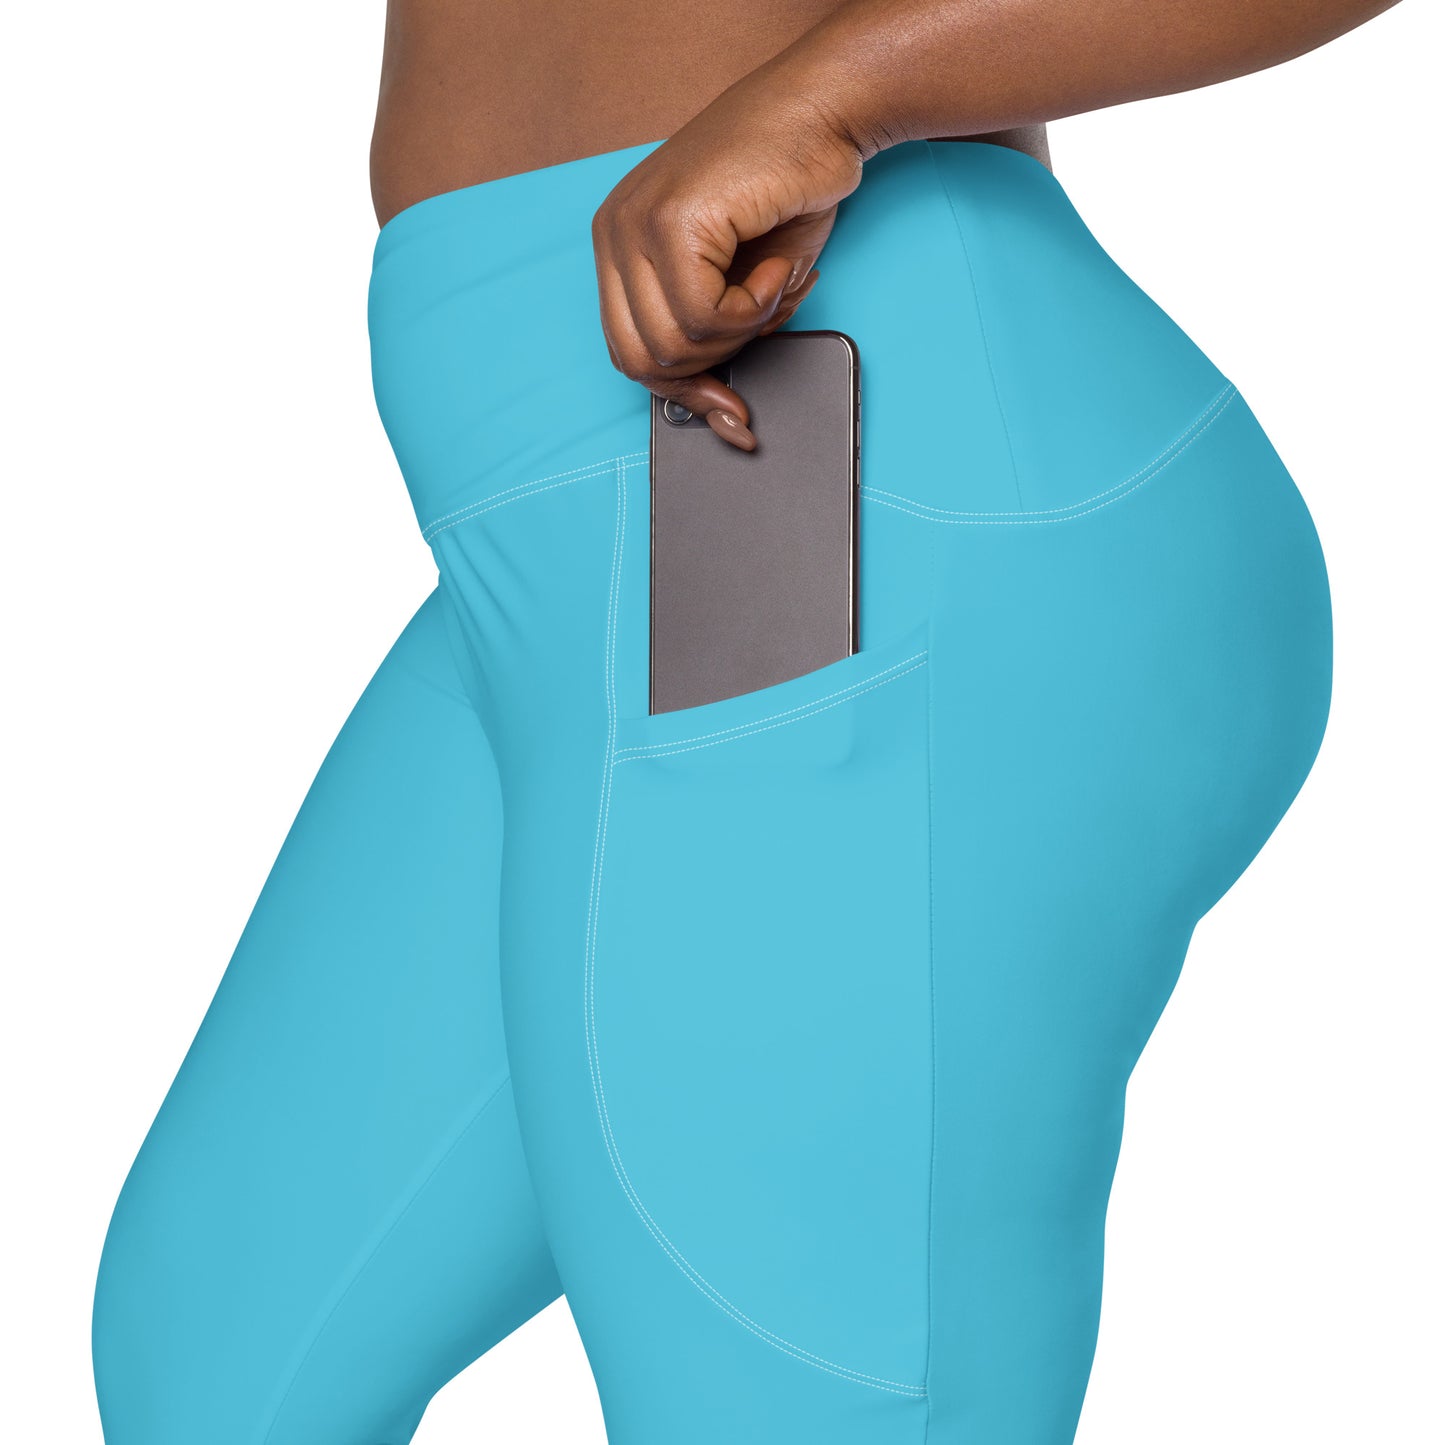 Malocchio Solid Color Crossover Waist 7/8 Recycled Yoga Leggings / Yoga Pants with Pockets